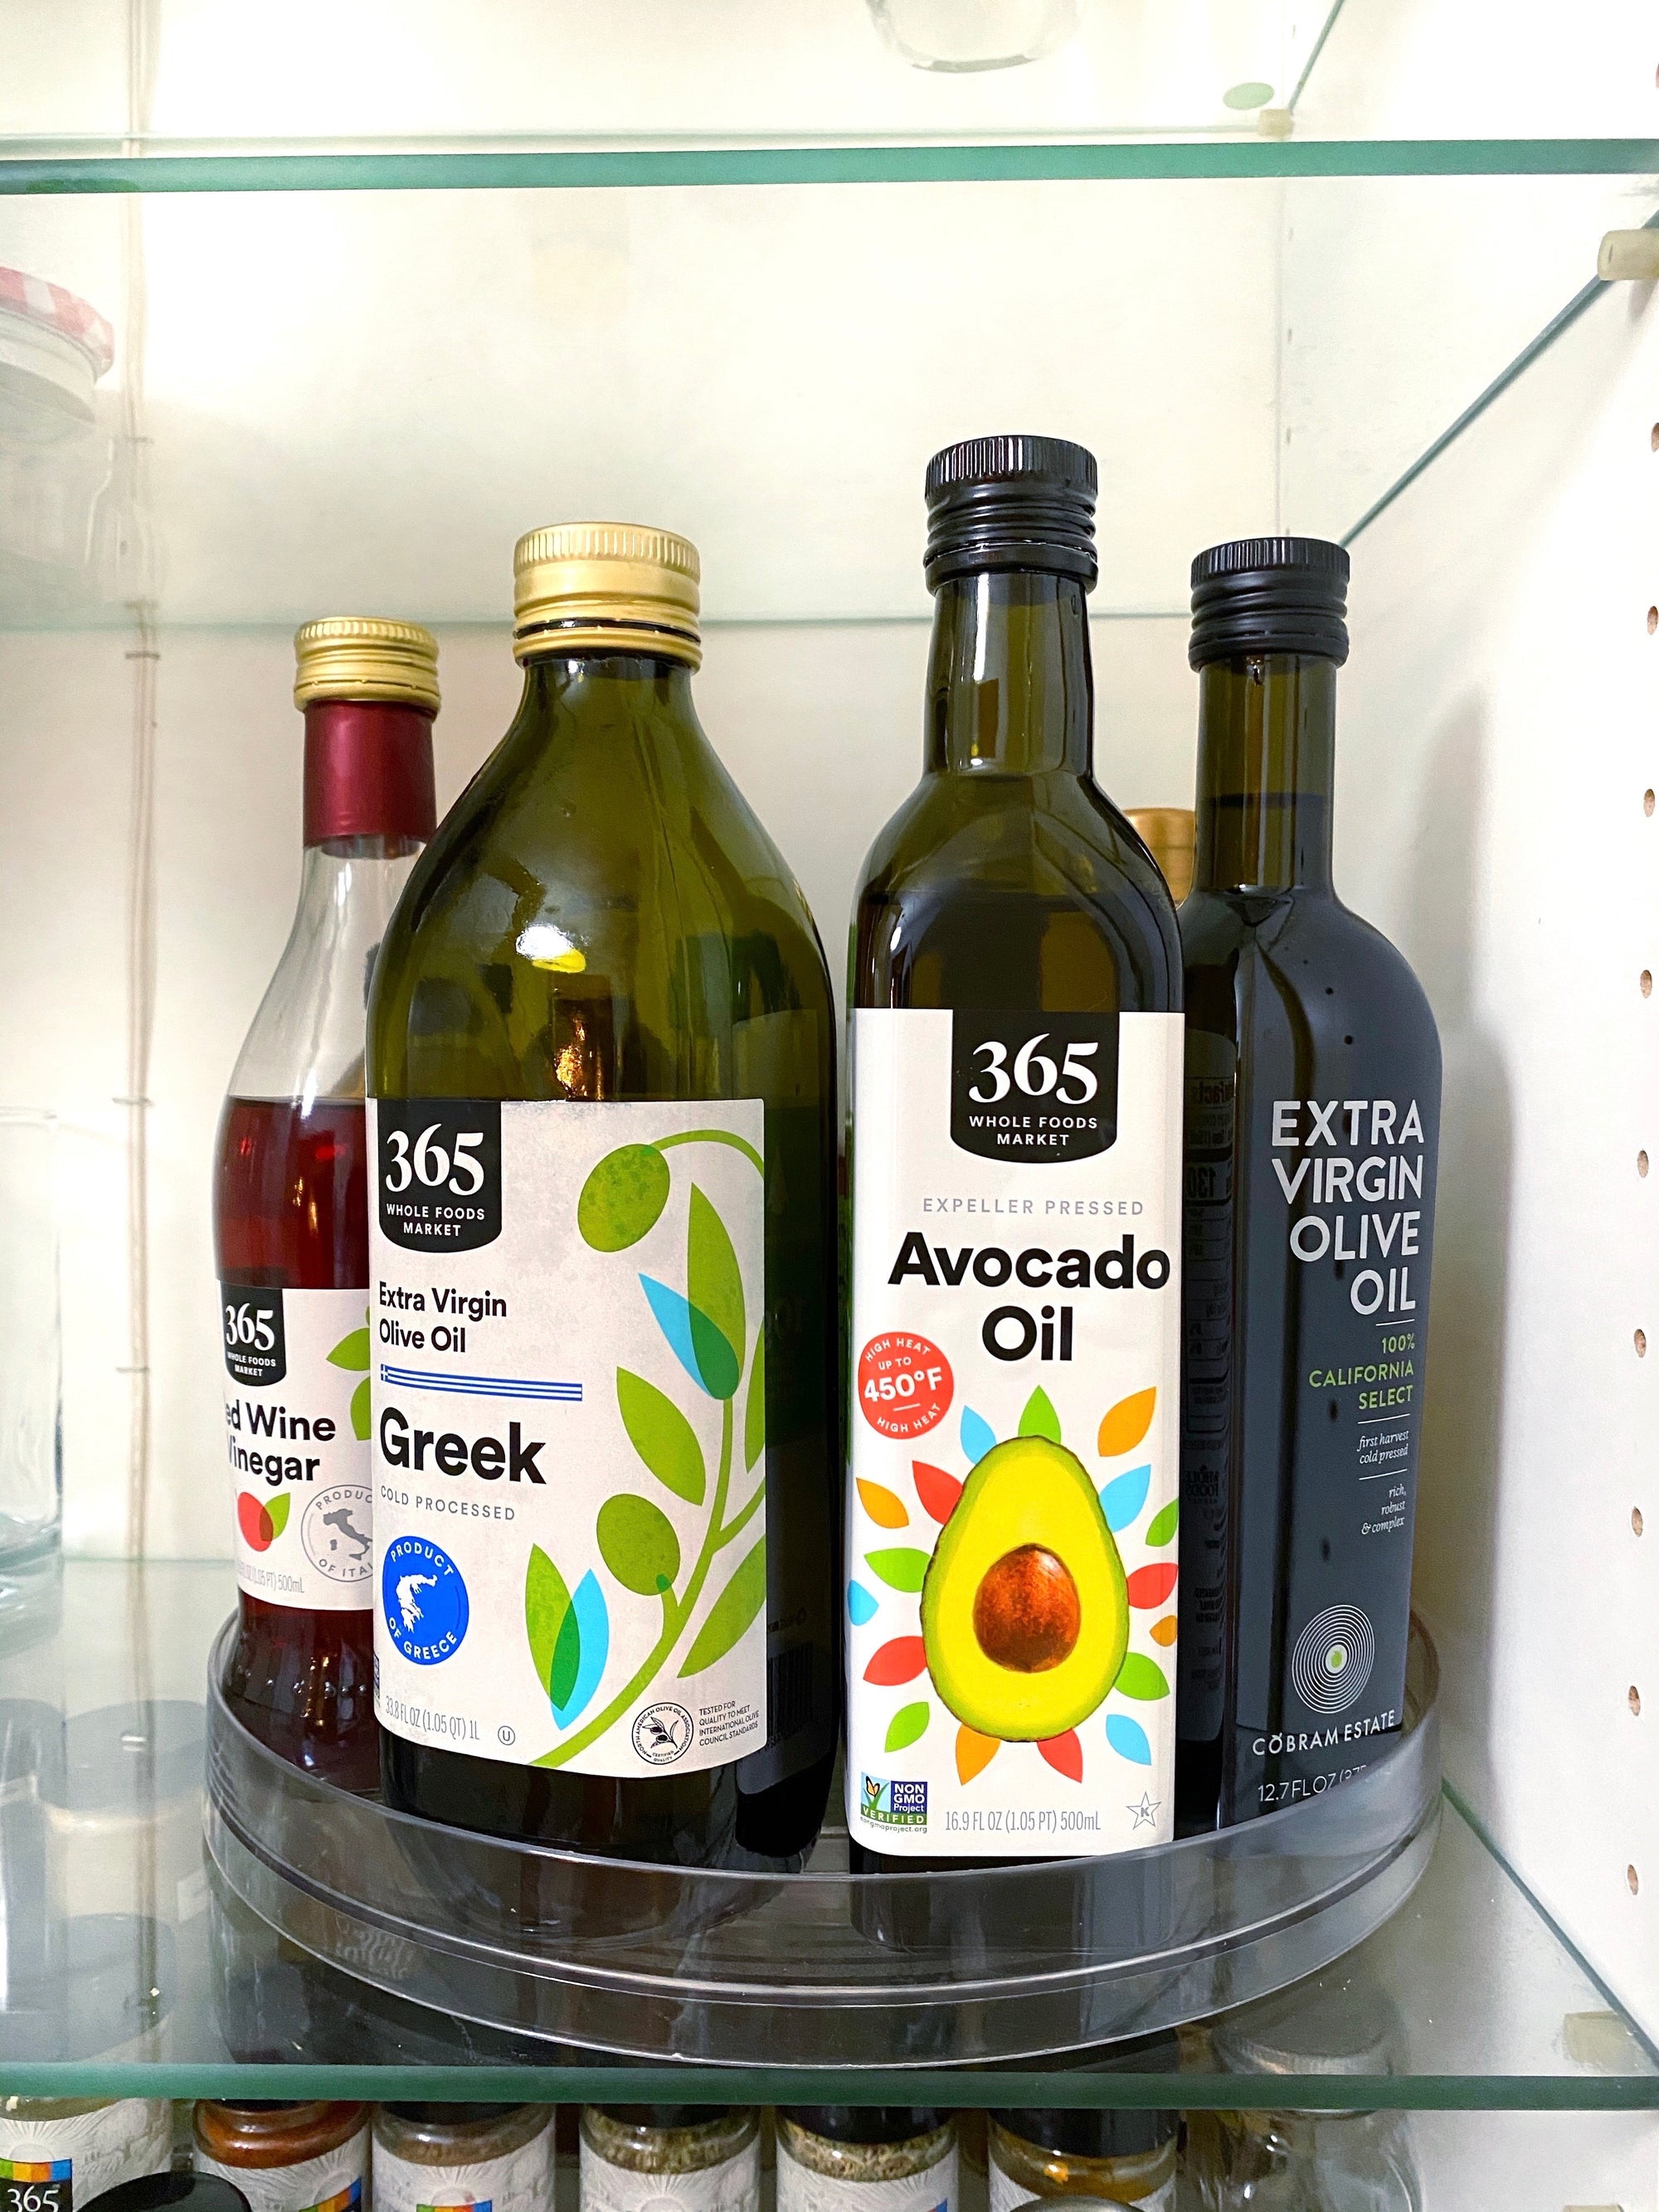 Oil and Vinegar Bottles on a Clear Lazy Susan / Turntable in Kitchen Pantry | thetidyspot.com